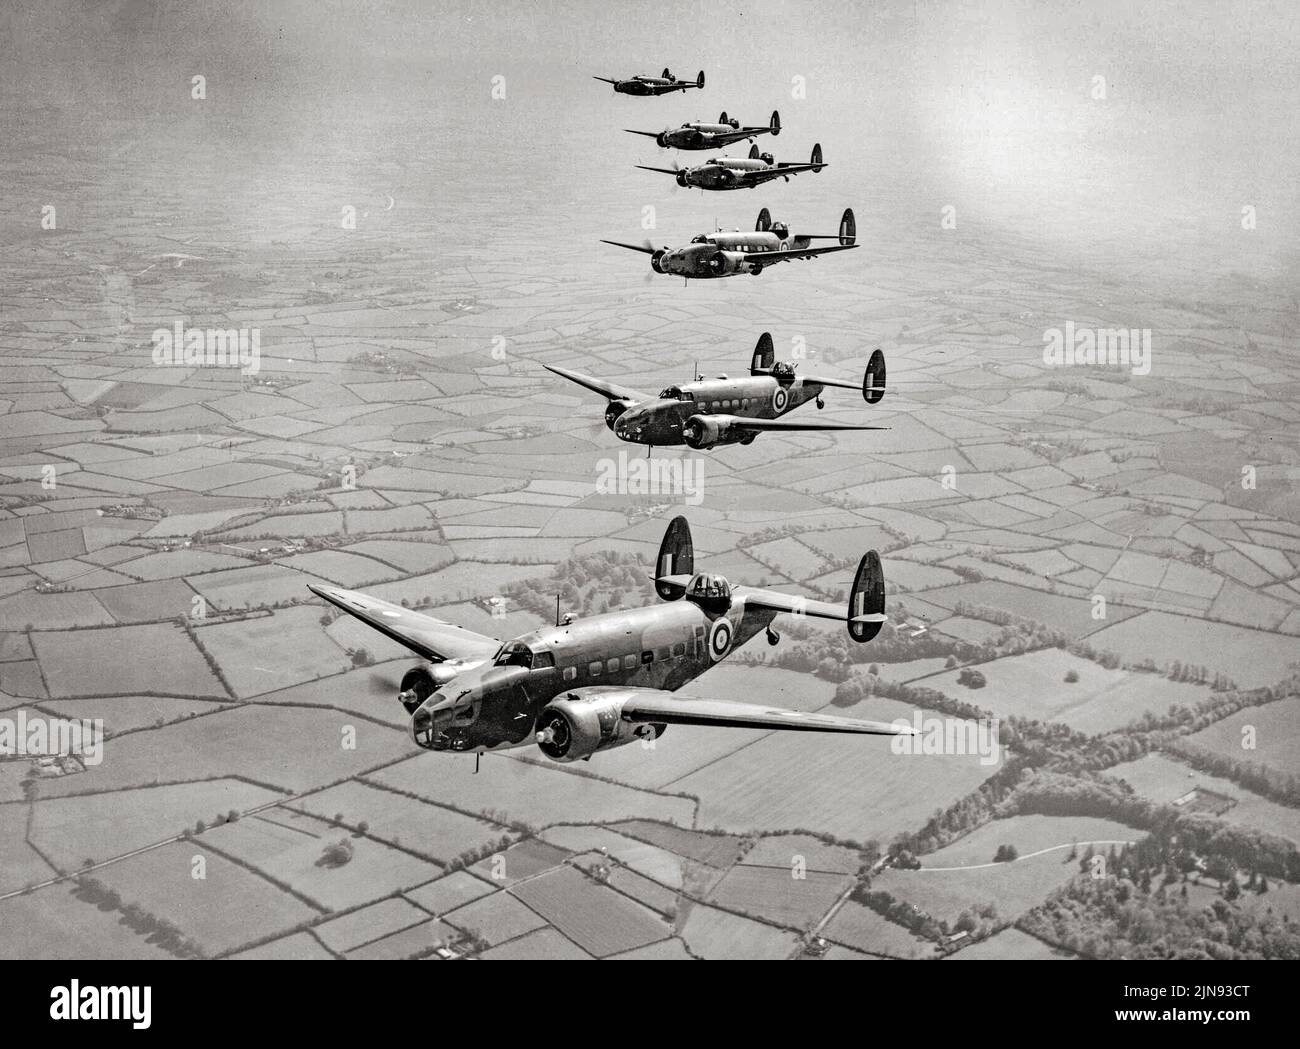 Lockheed Hudson Mark IIs and IIIs of No. 233 Squadron RAF based at Aldergrove, County Antrim, flying over Northern Ireland. The Hudson served throughout the war, mainly with Coastal Command but also in transport and training roles, as well as delivering agents into occupied France. Stock Photo